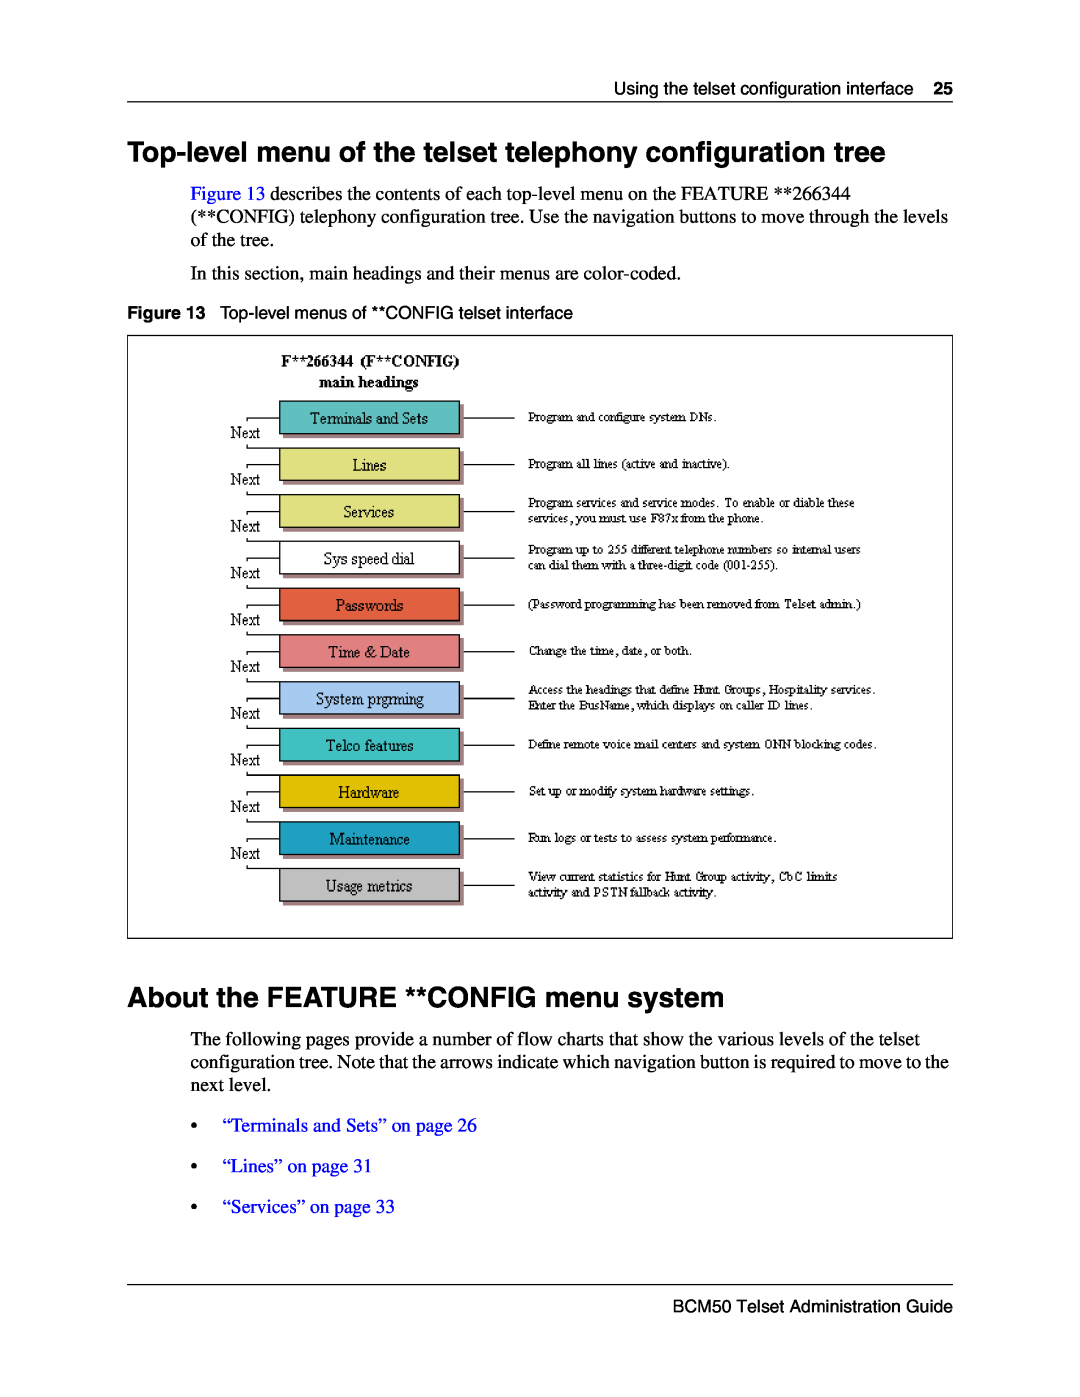 Nortel Networks BCM50 2.0 manual Top-level menu of the telset telephony configuration tree 